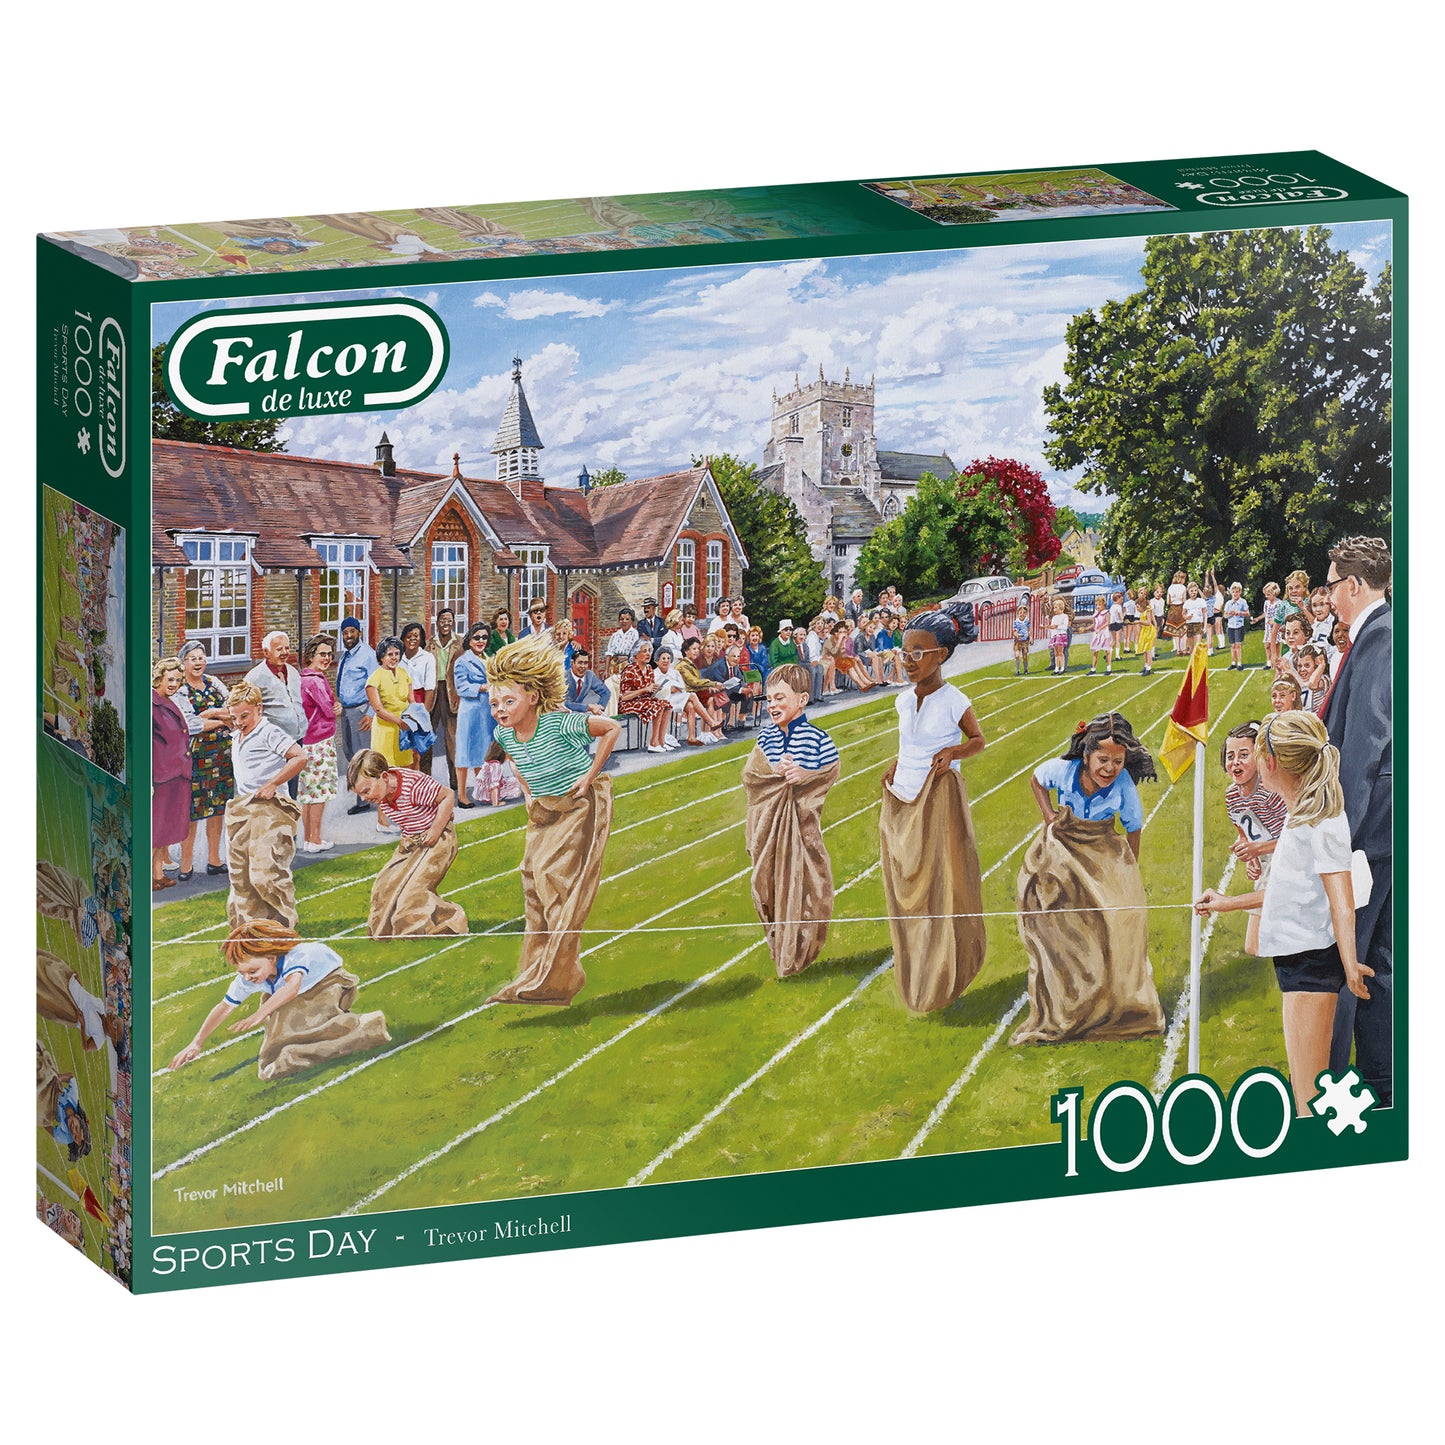 Falcon - Sports Day (1000 pieces) - product image - Jumboplay.com